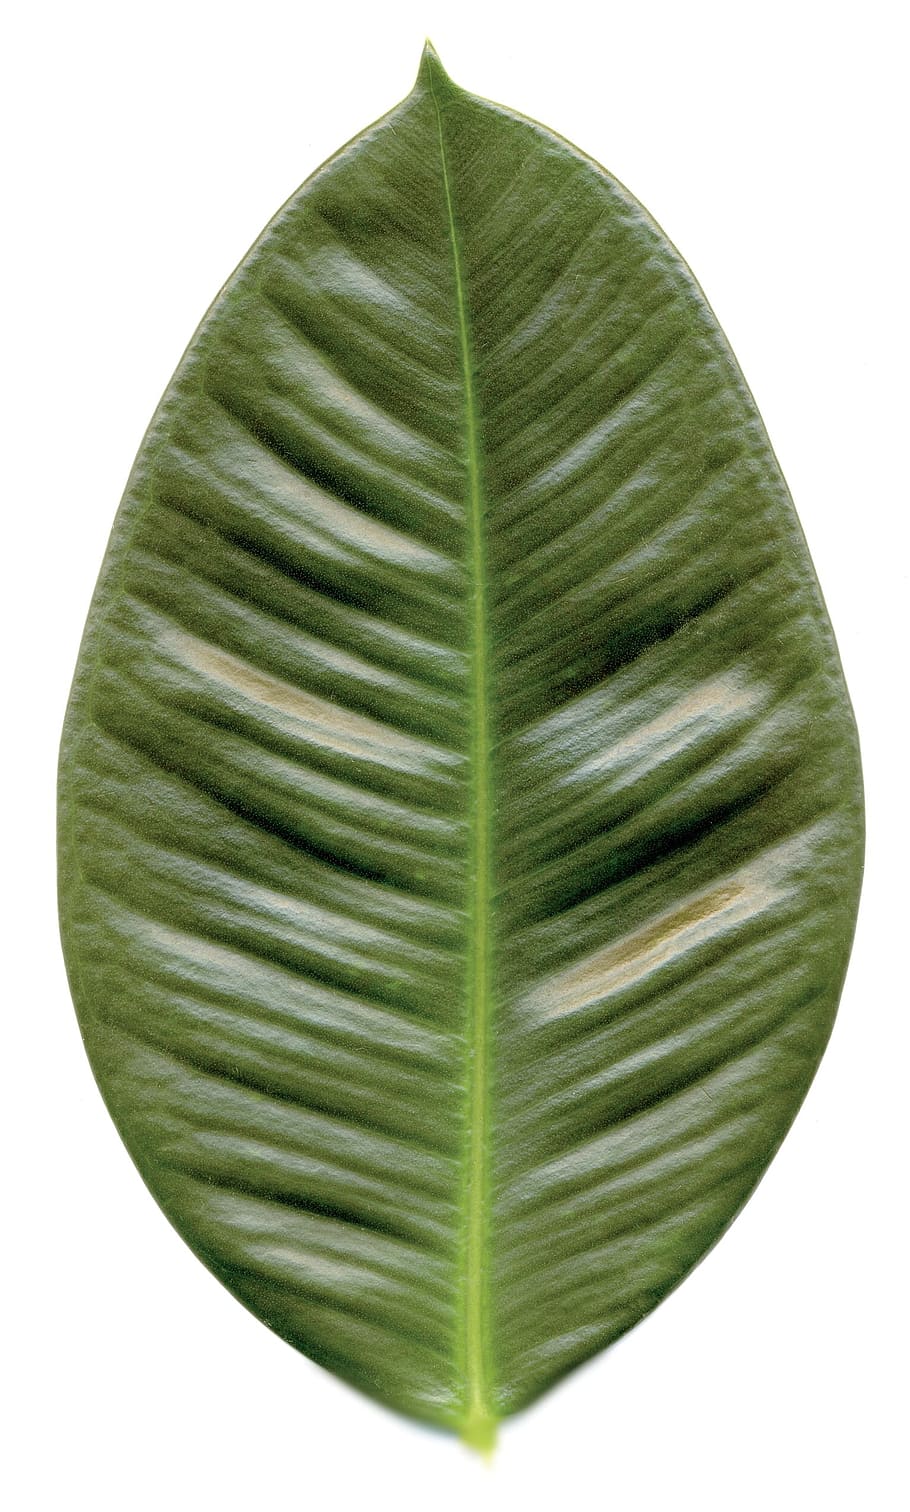 Leaf, Rubber Tree, Nature, green, cut out, rubber, plant, alone, solo, tree